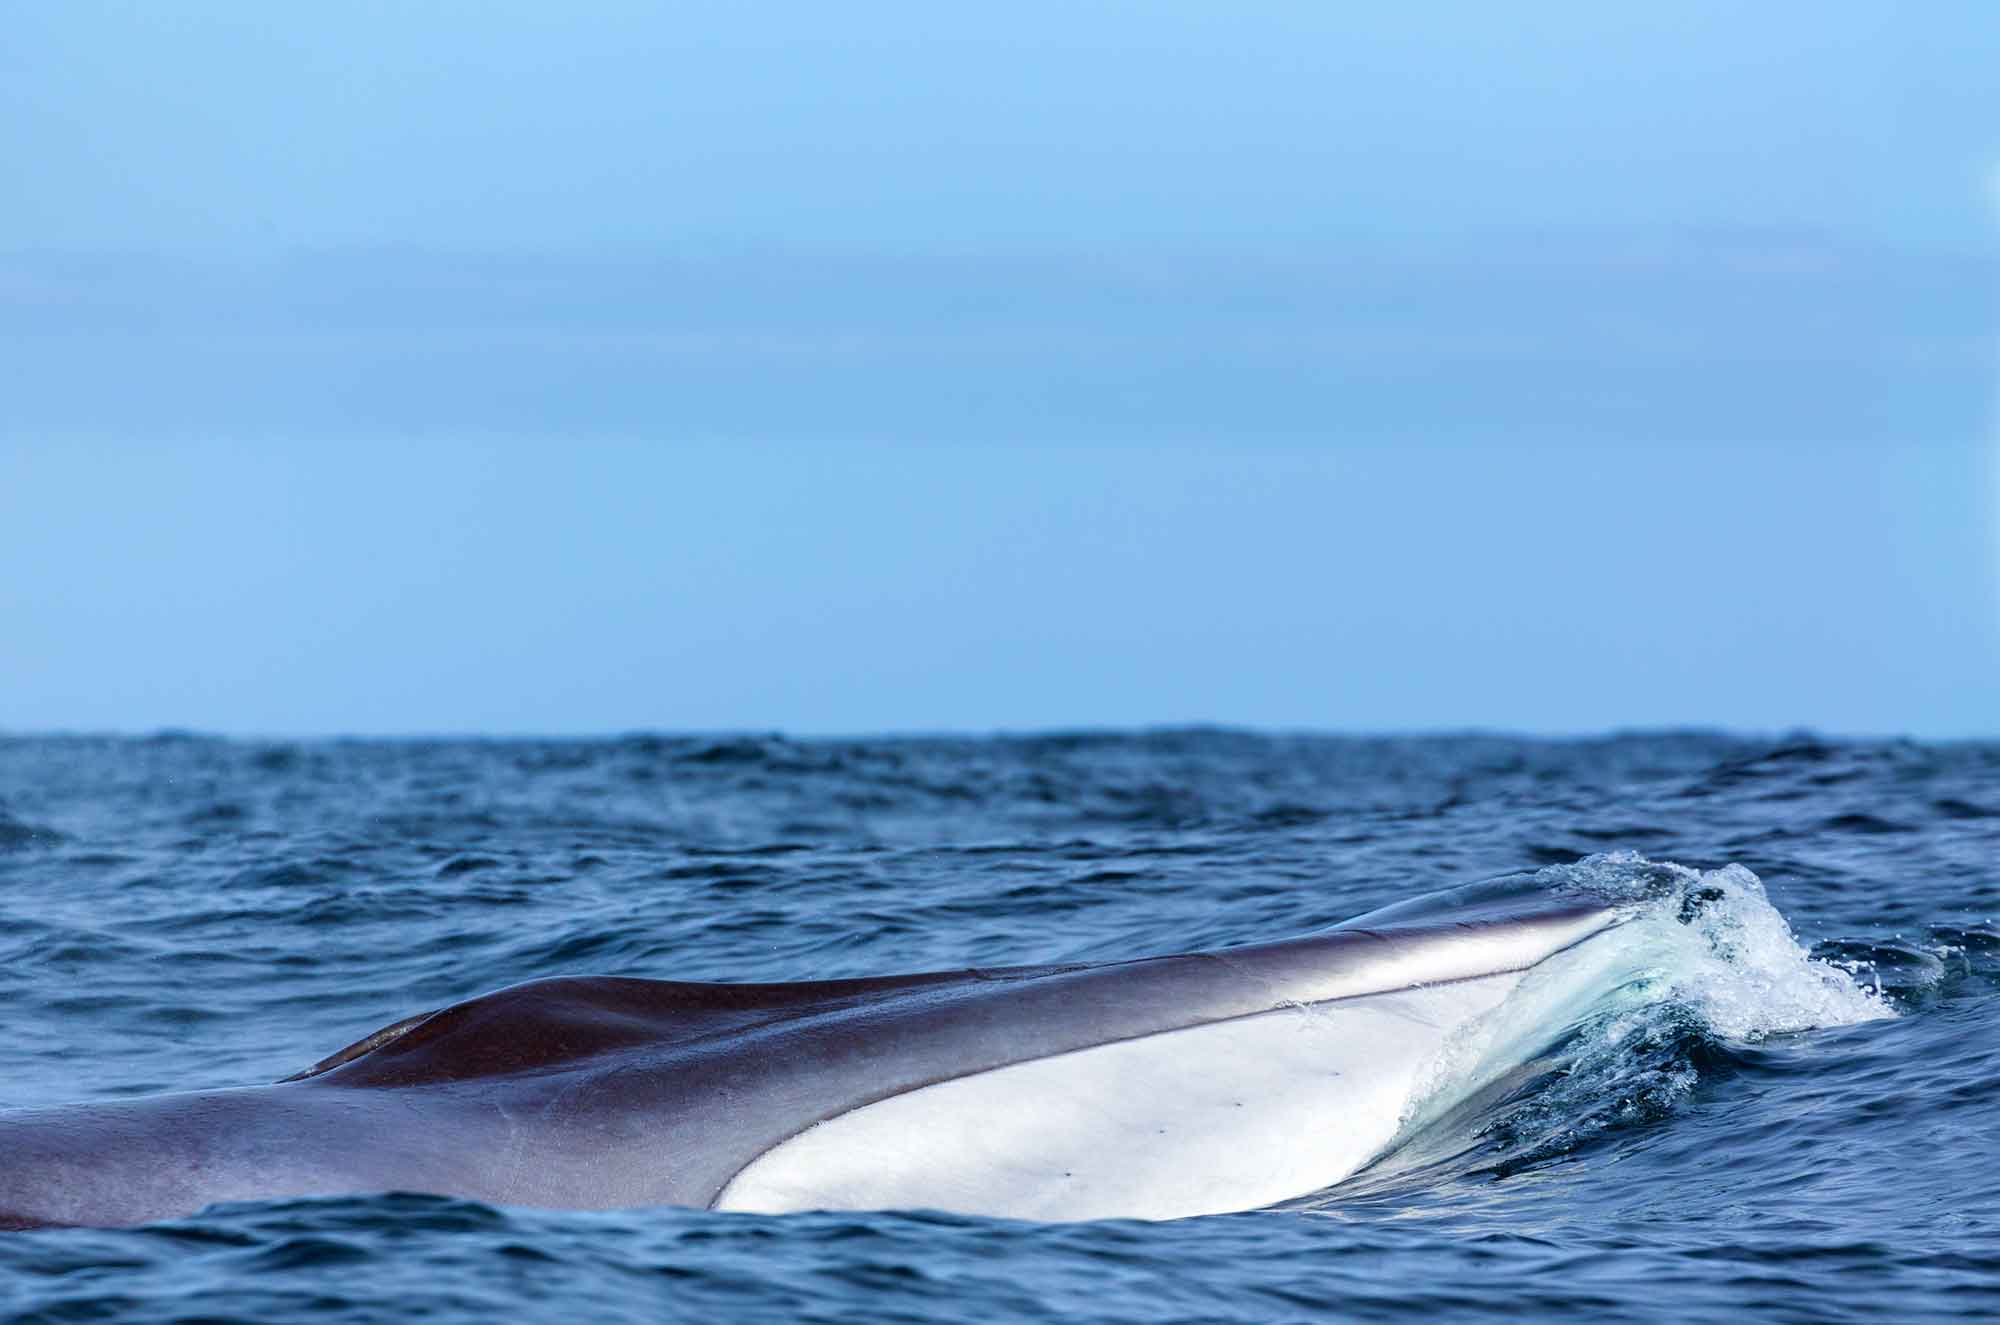 Fin whales are a resident species in San Diego typically seen farther offshore.